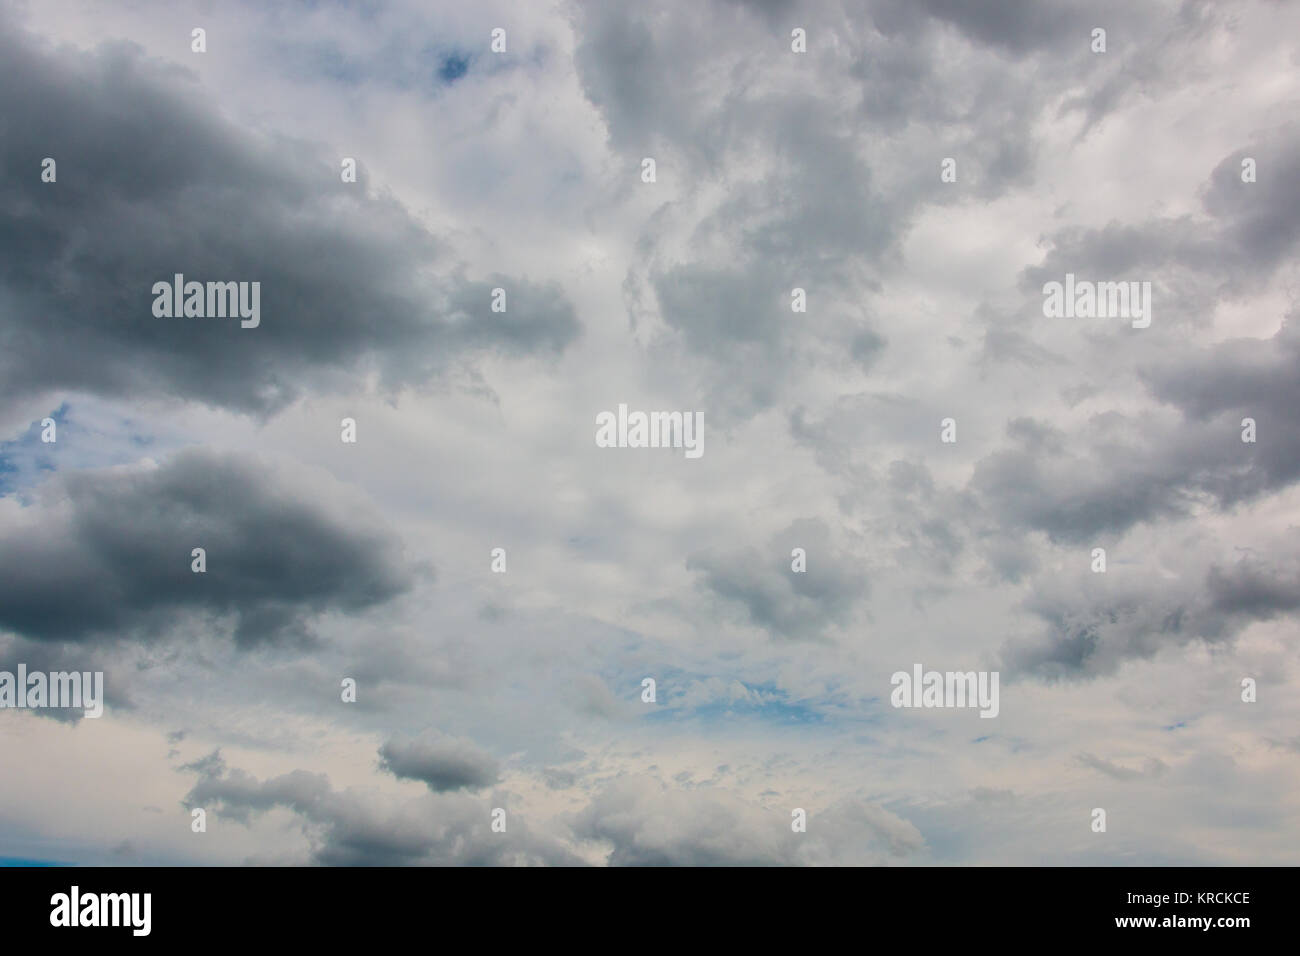 The sky full of white and gray clouds Stock Photo